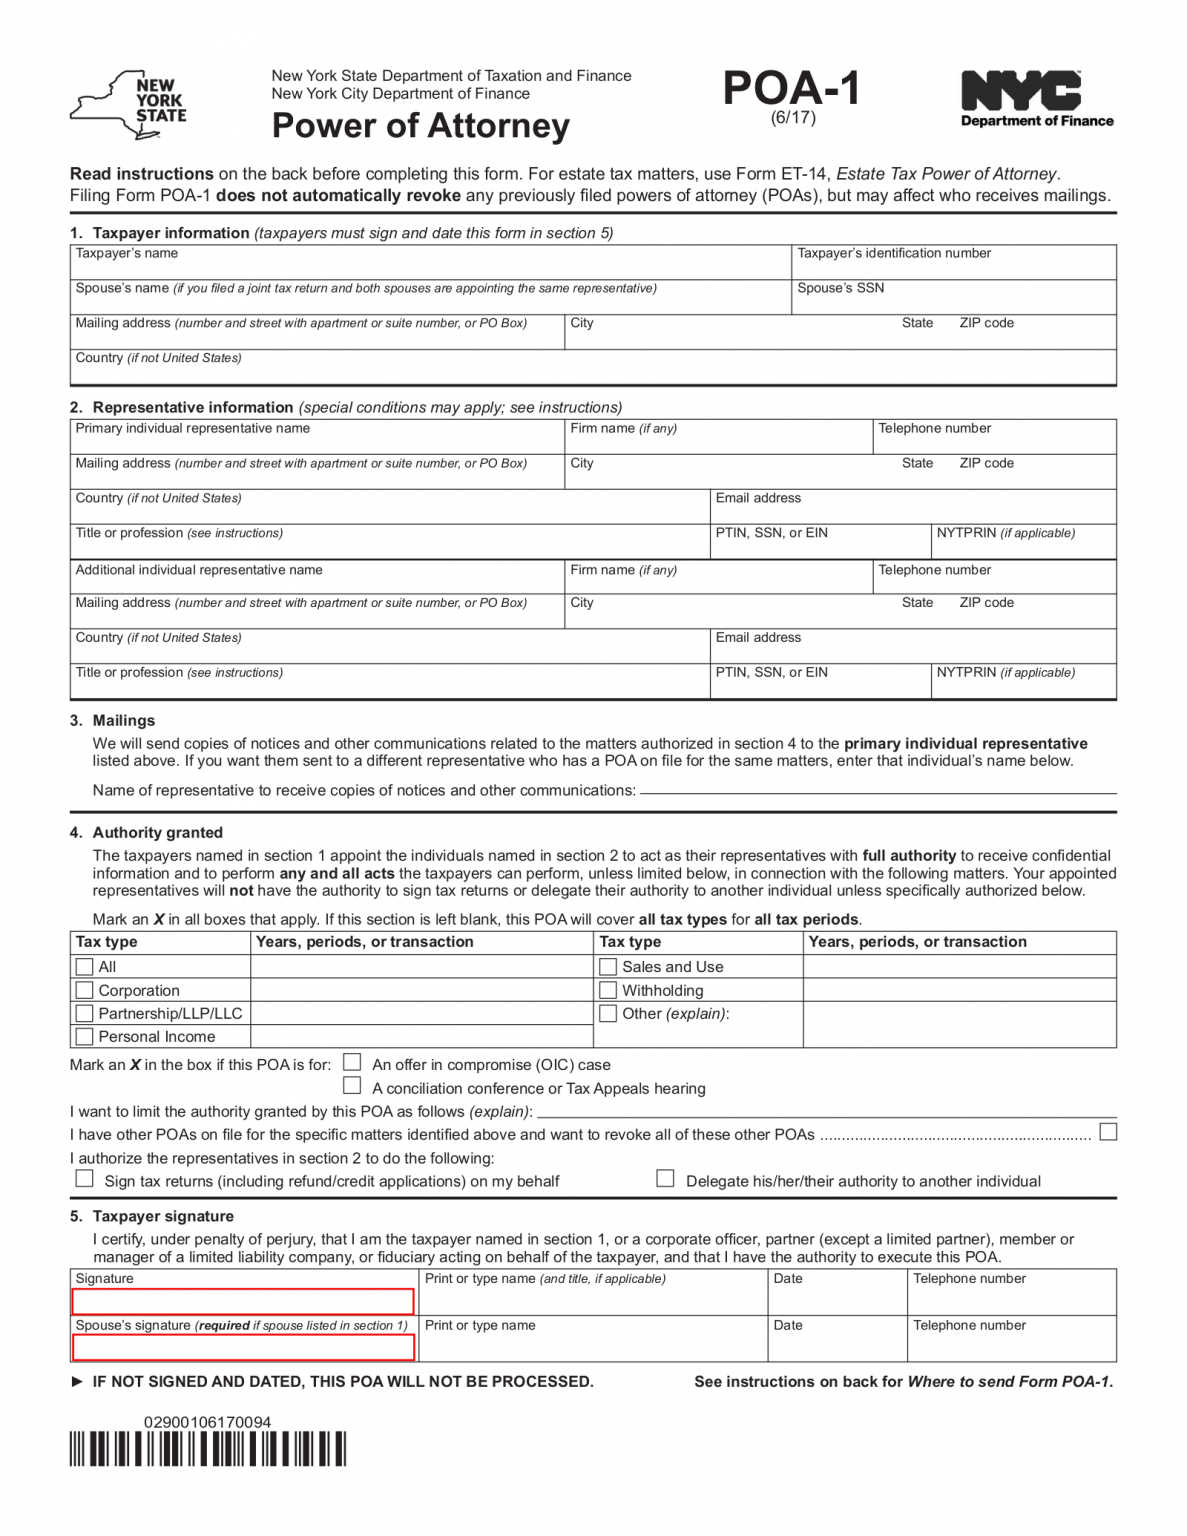 New York Tax Power of Attorney (Form POA1) eForms